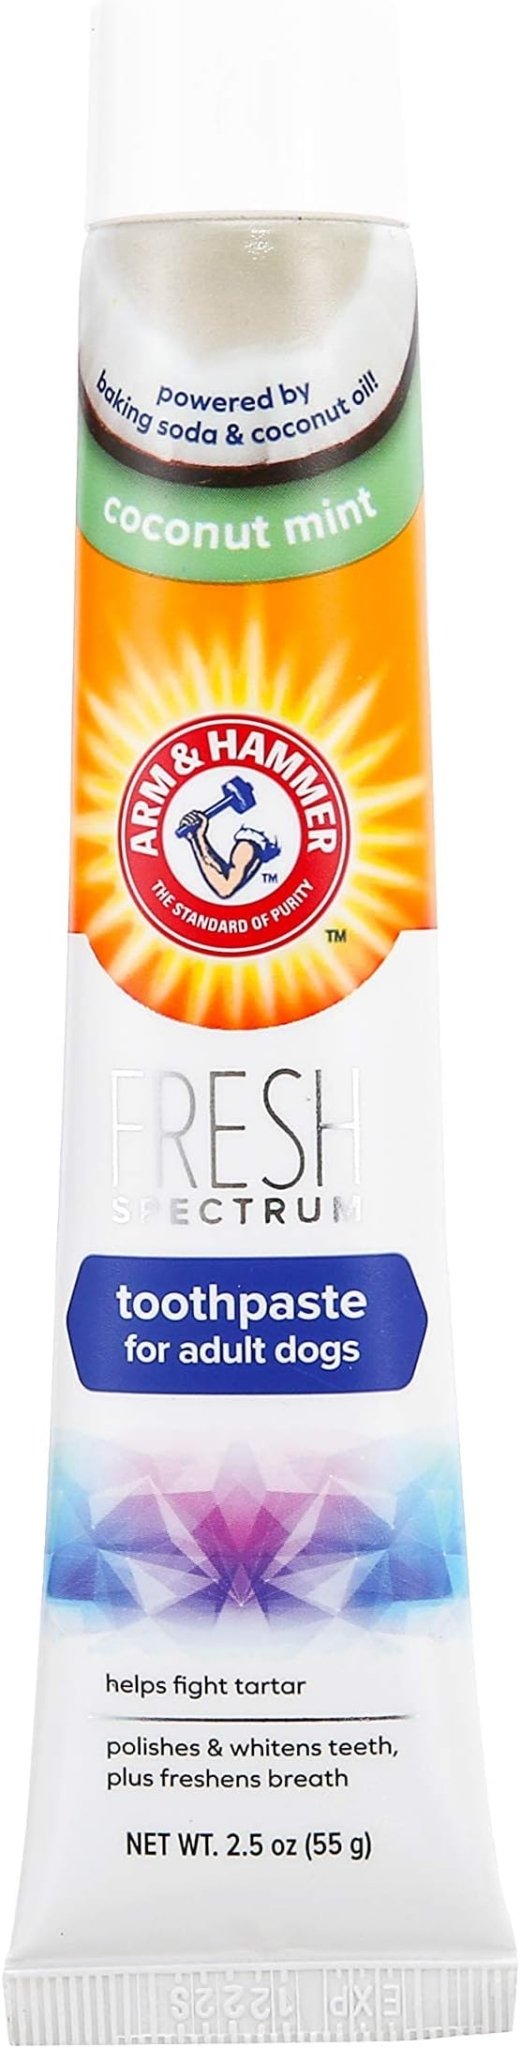 Arm & Hammer Coconut Mint Toothpaste for Dogs, Arm & Hammer,